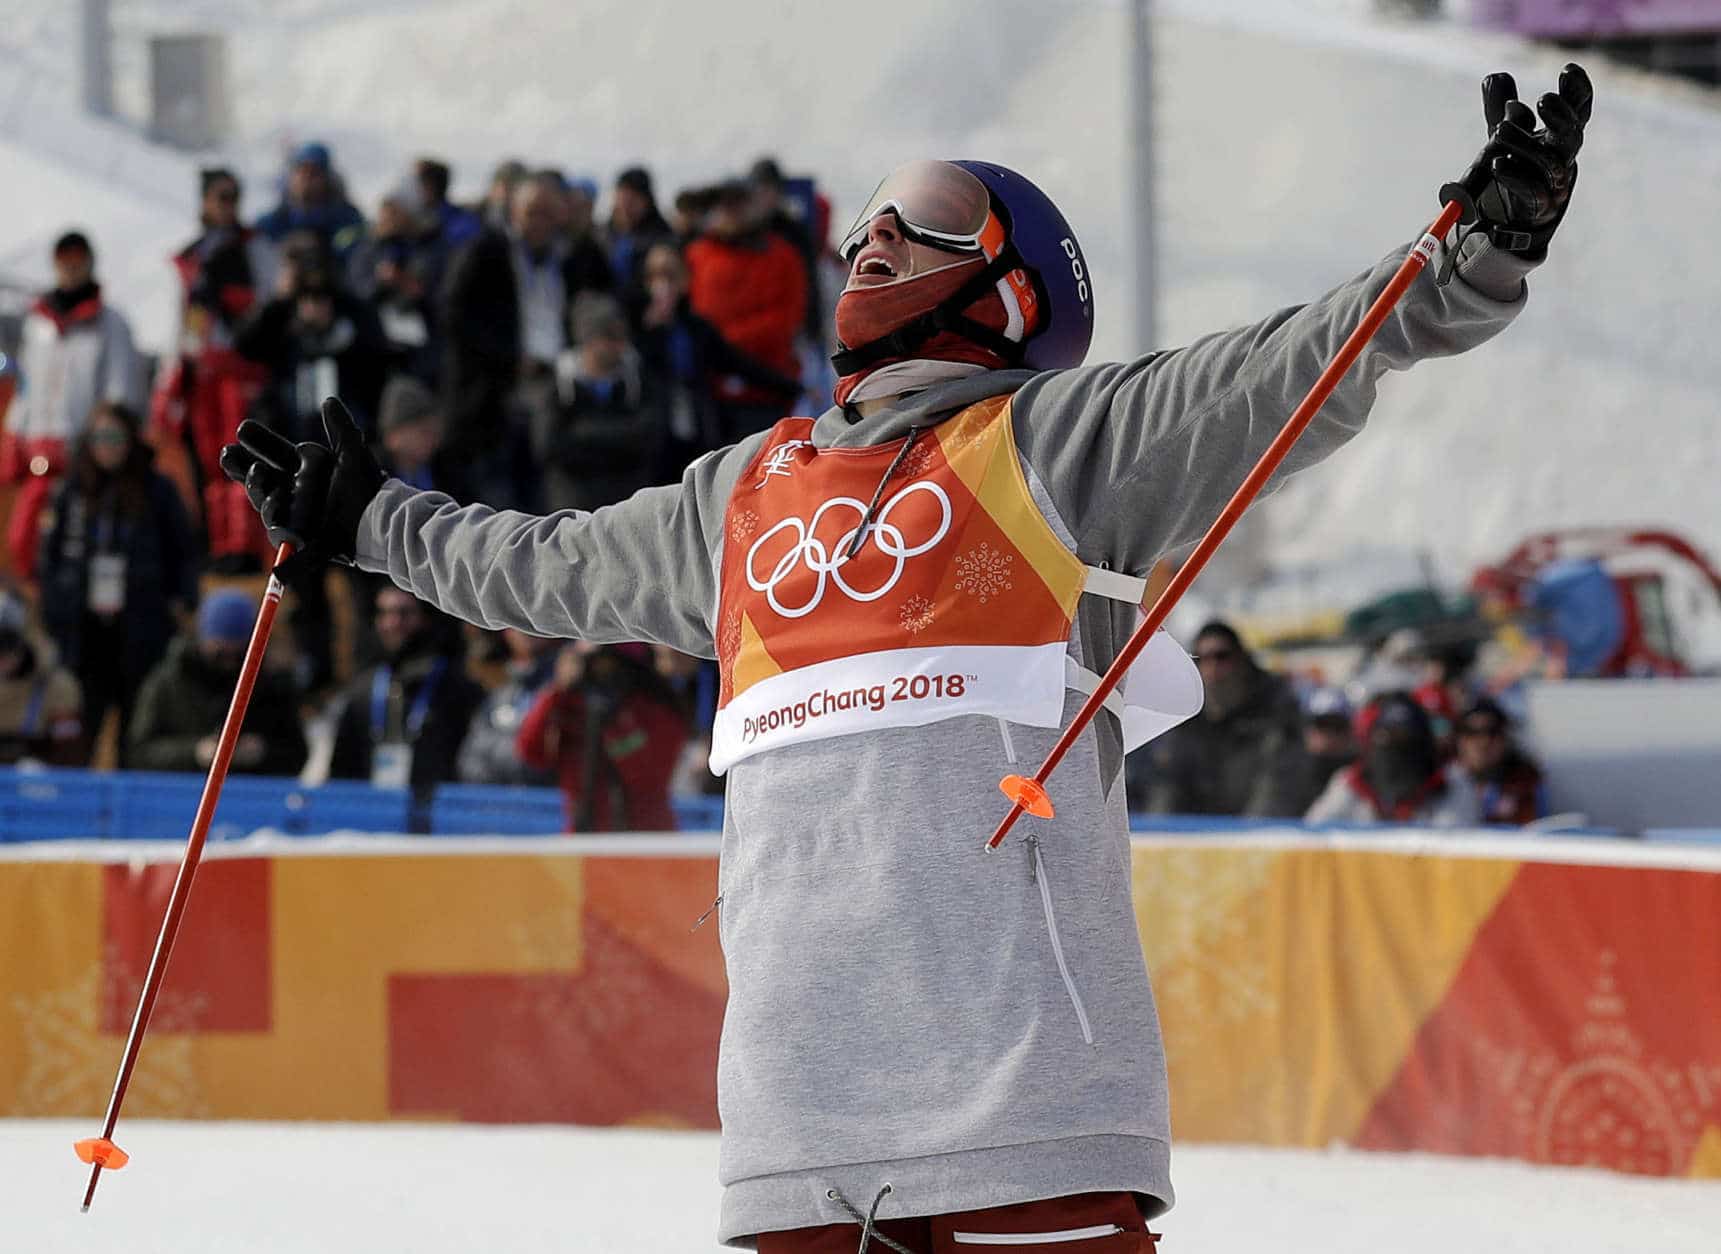 Silver medal winner Nick Goepper, of the United States, reacts to his run during the men's slopestyle final at Phoenix Snow Park at the 2018 Winter Olympics in Pyeongchang, South Korea, Sunday, Feb. 18, 2018. (AP Photo/Gregory Bull)